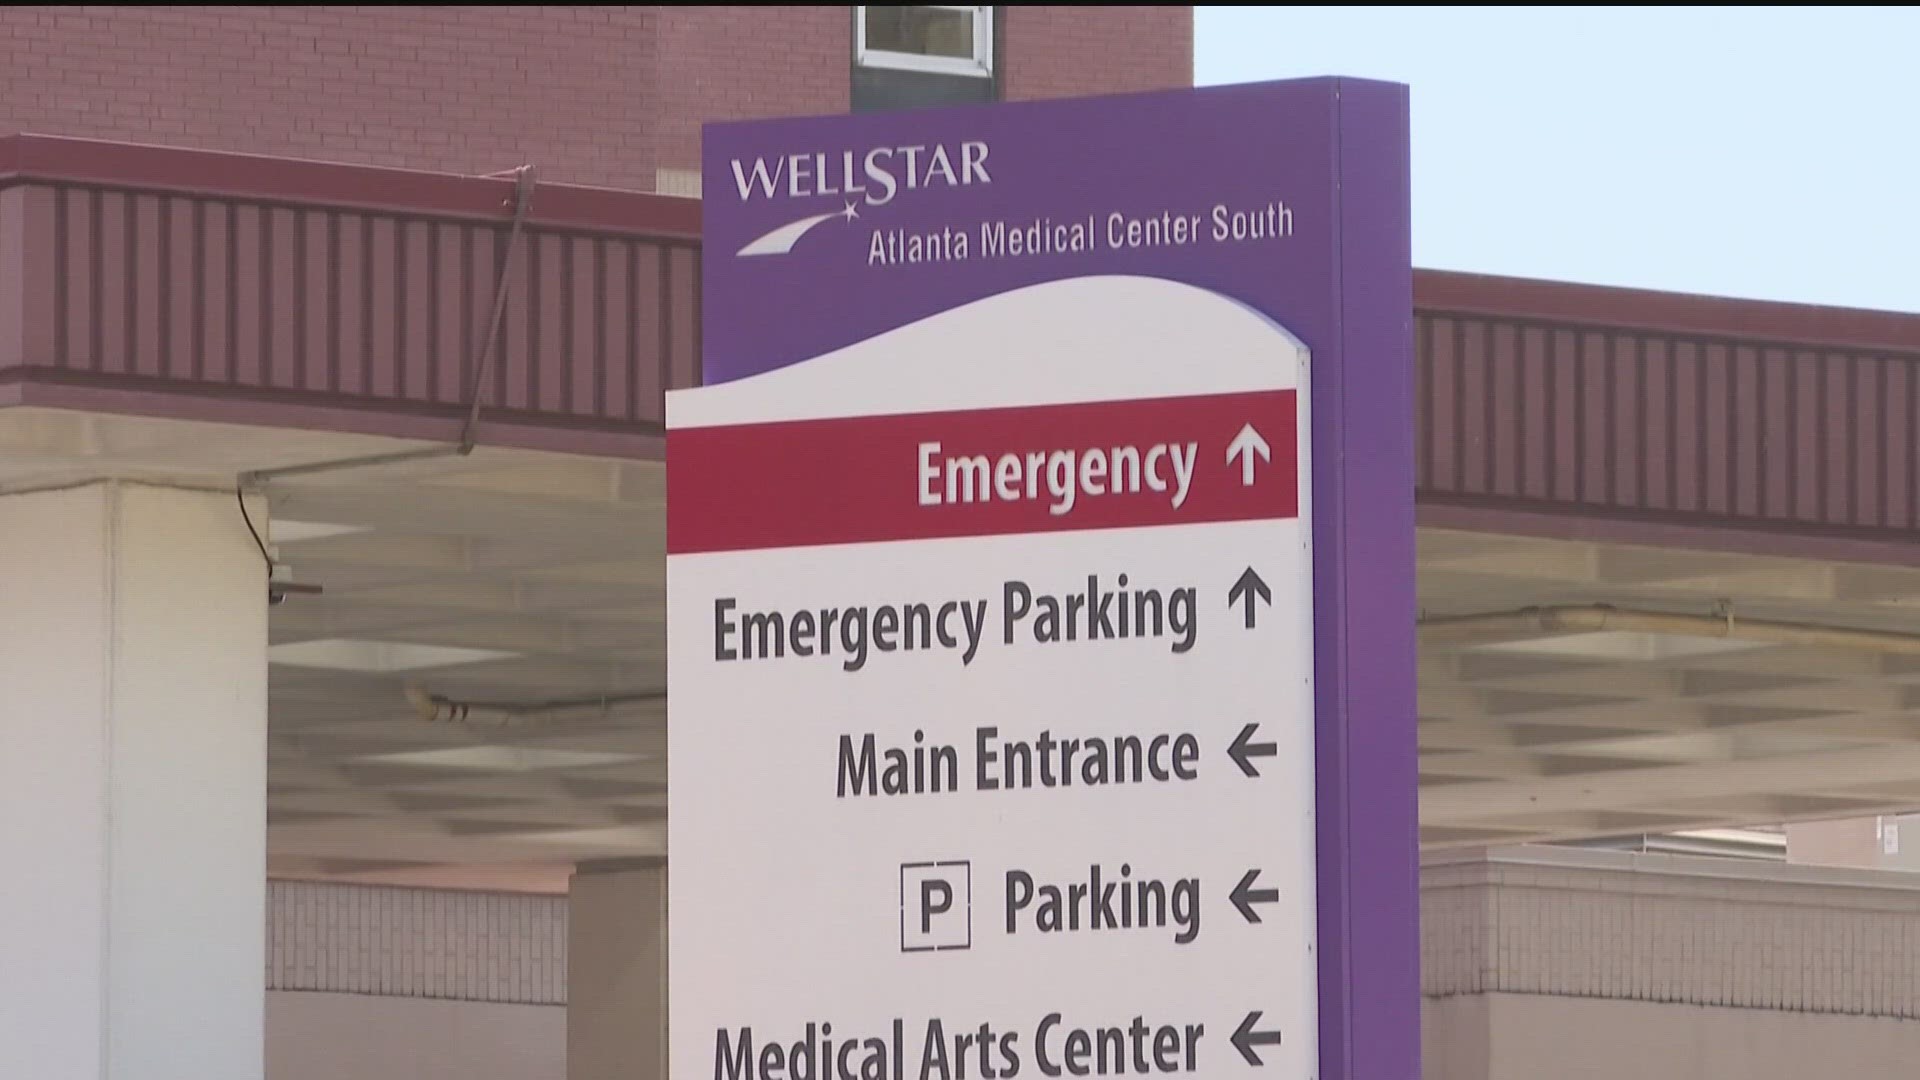 Wellstar said in a release it is "committed to a thoughtful process to determine the future" of the site.